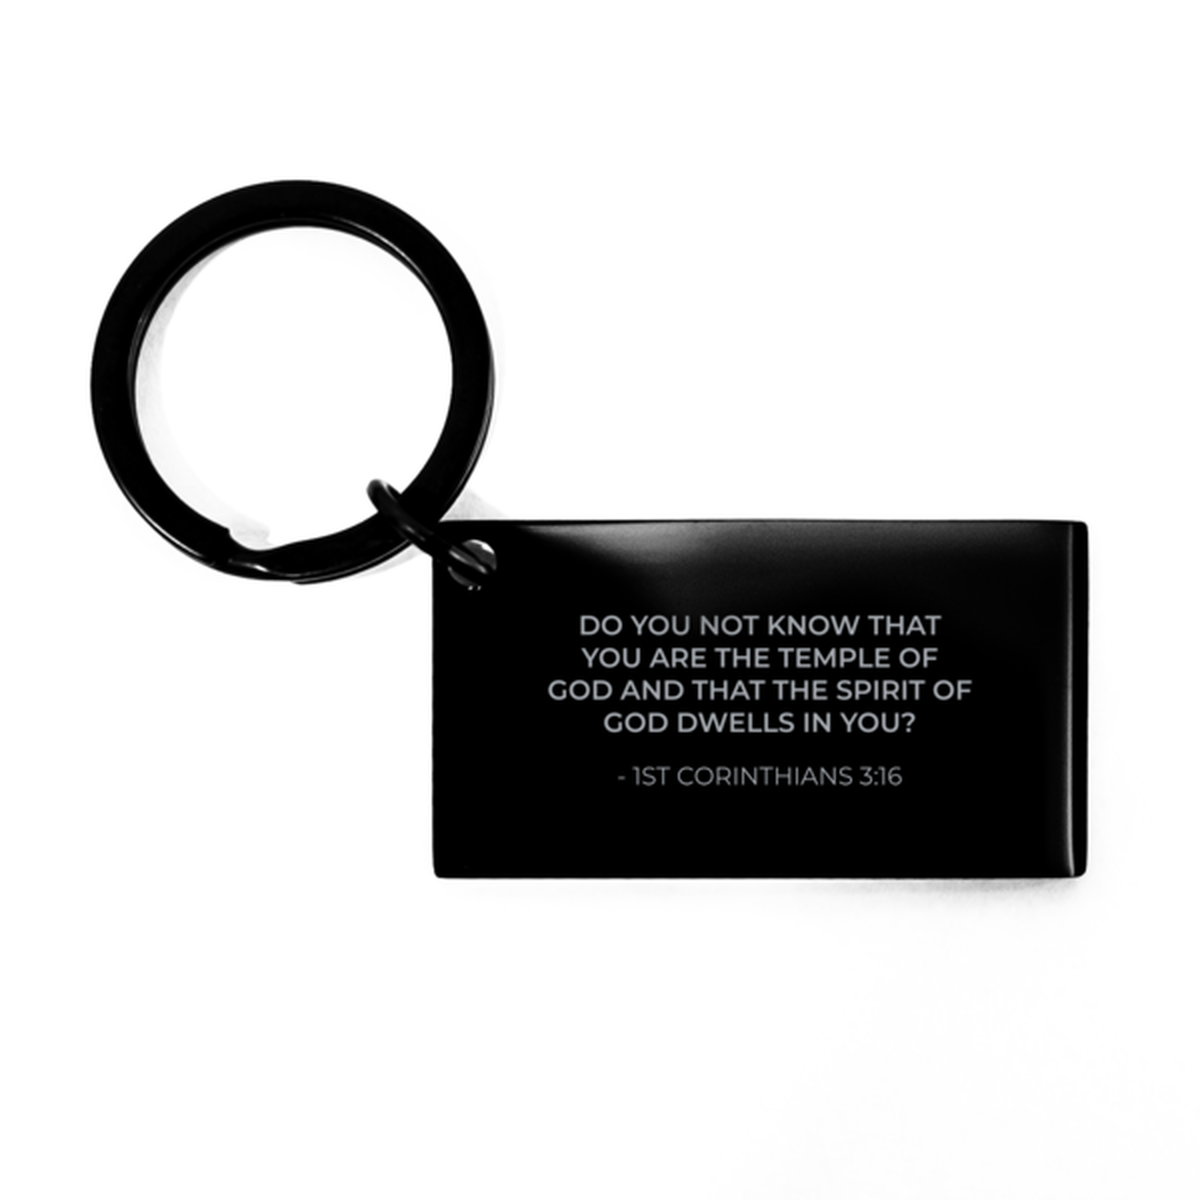 Bible Verse Black Keychain, 1St Corinthians 3:16 Do You Not Know That You Are The, Christian Inspirational Key Ring Gifts For Men Women